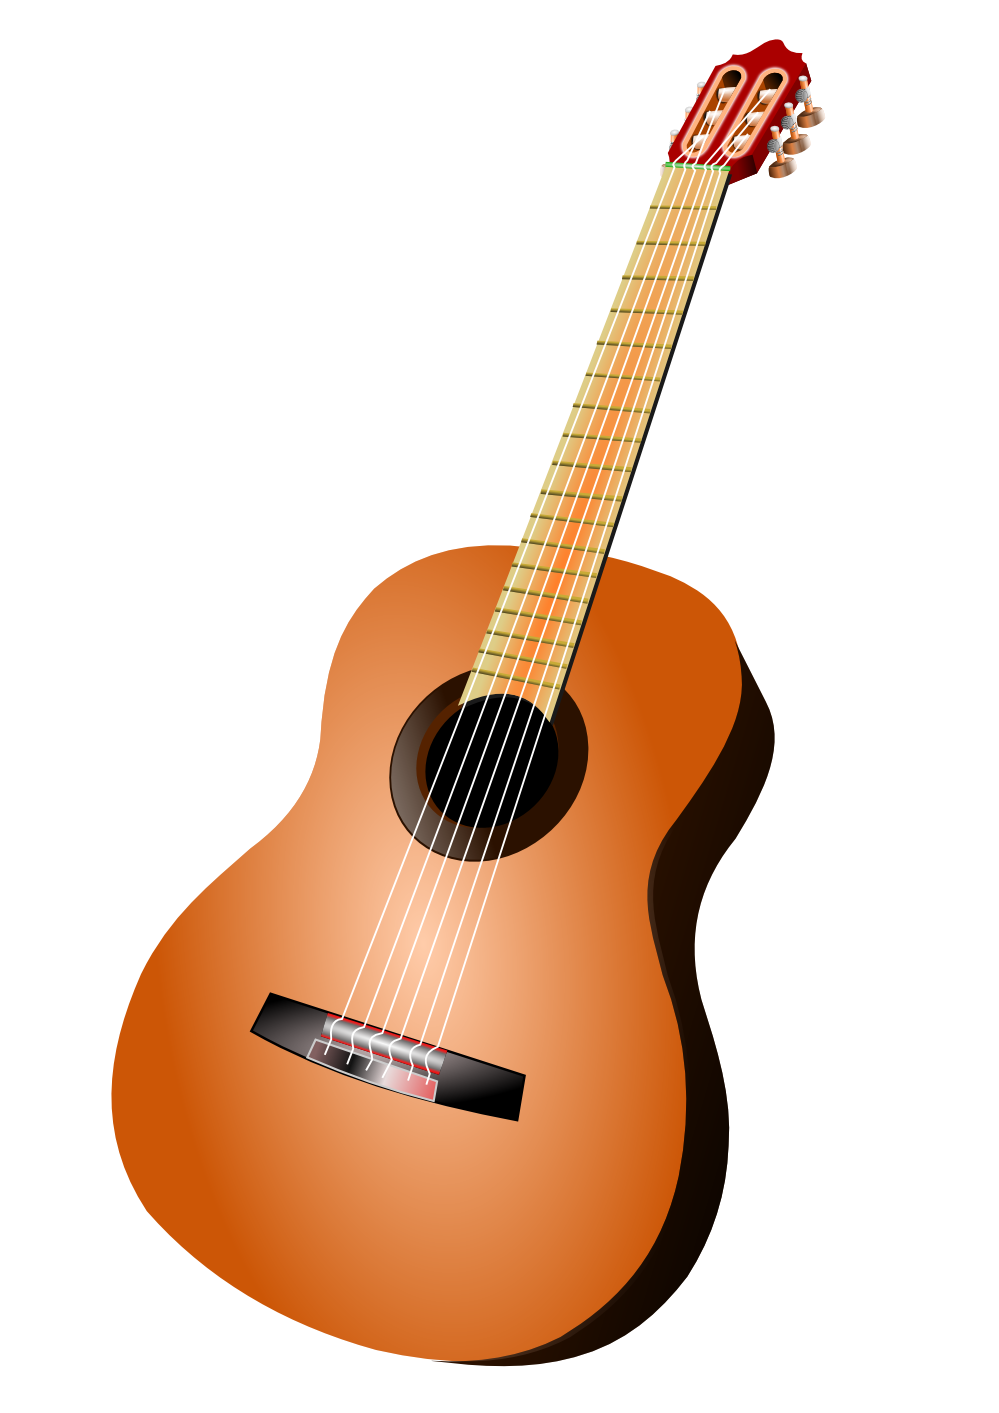 Guitar Acoustic Vector Music HD Image Free PNG Image